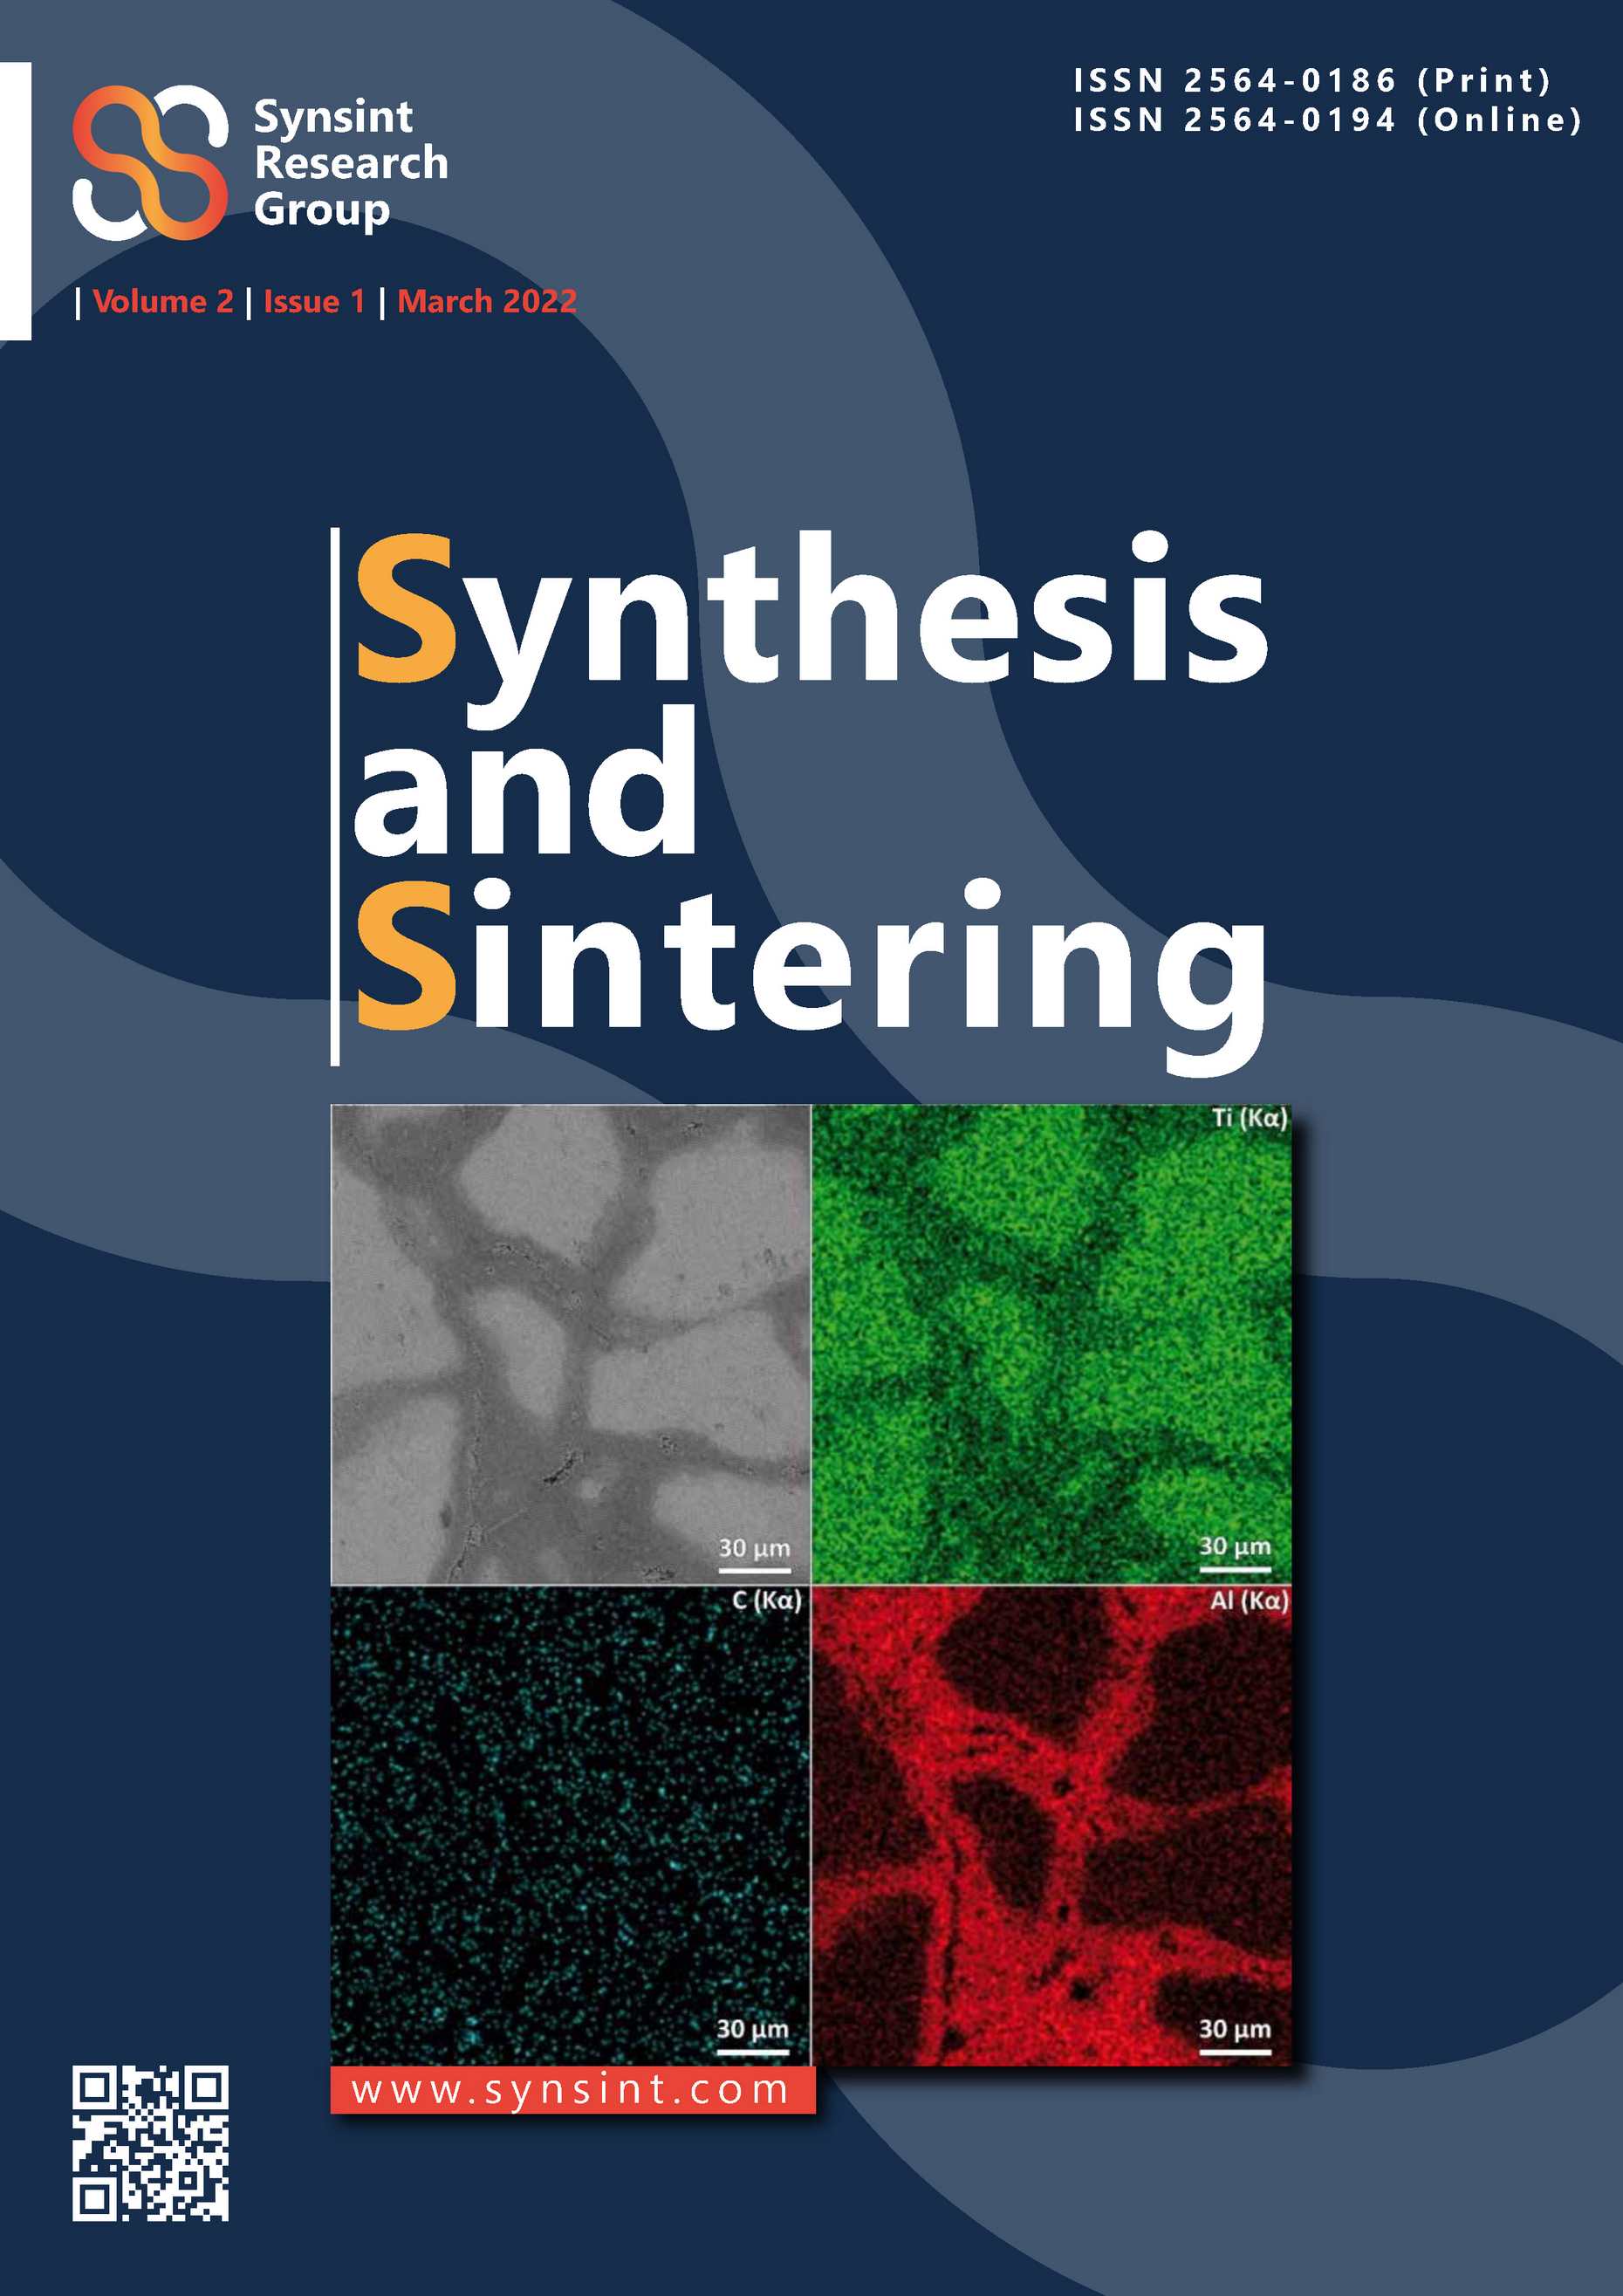 Synthesis and Sintering Vol. 2 No. 1 (2022)